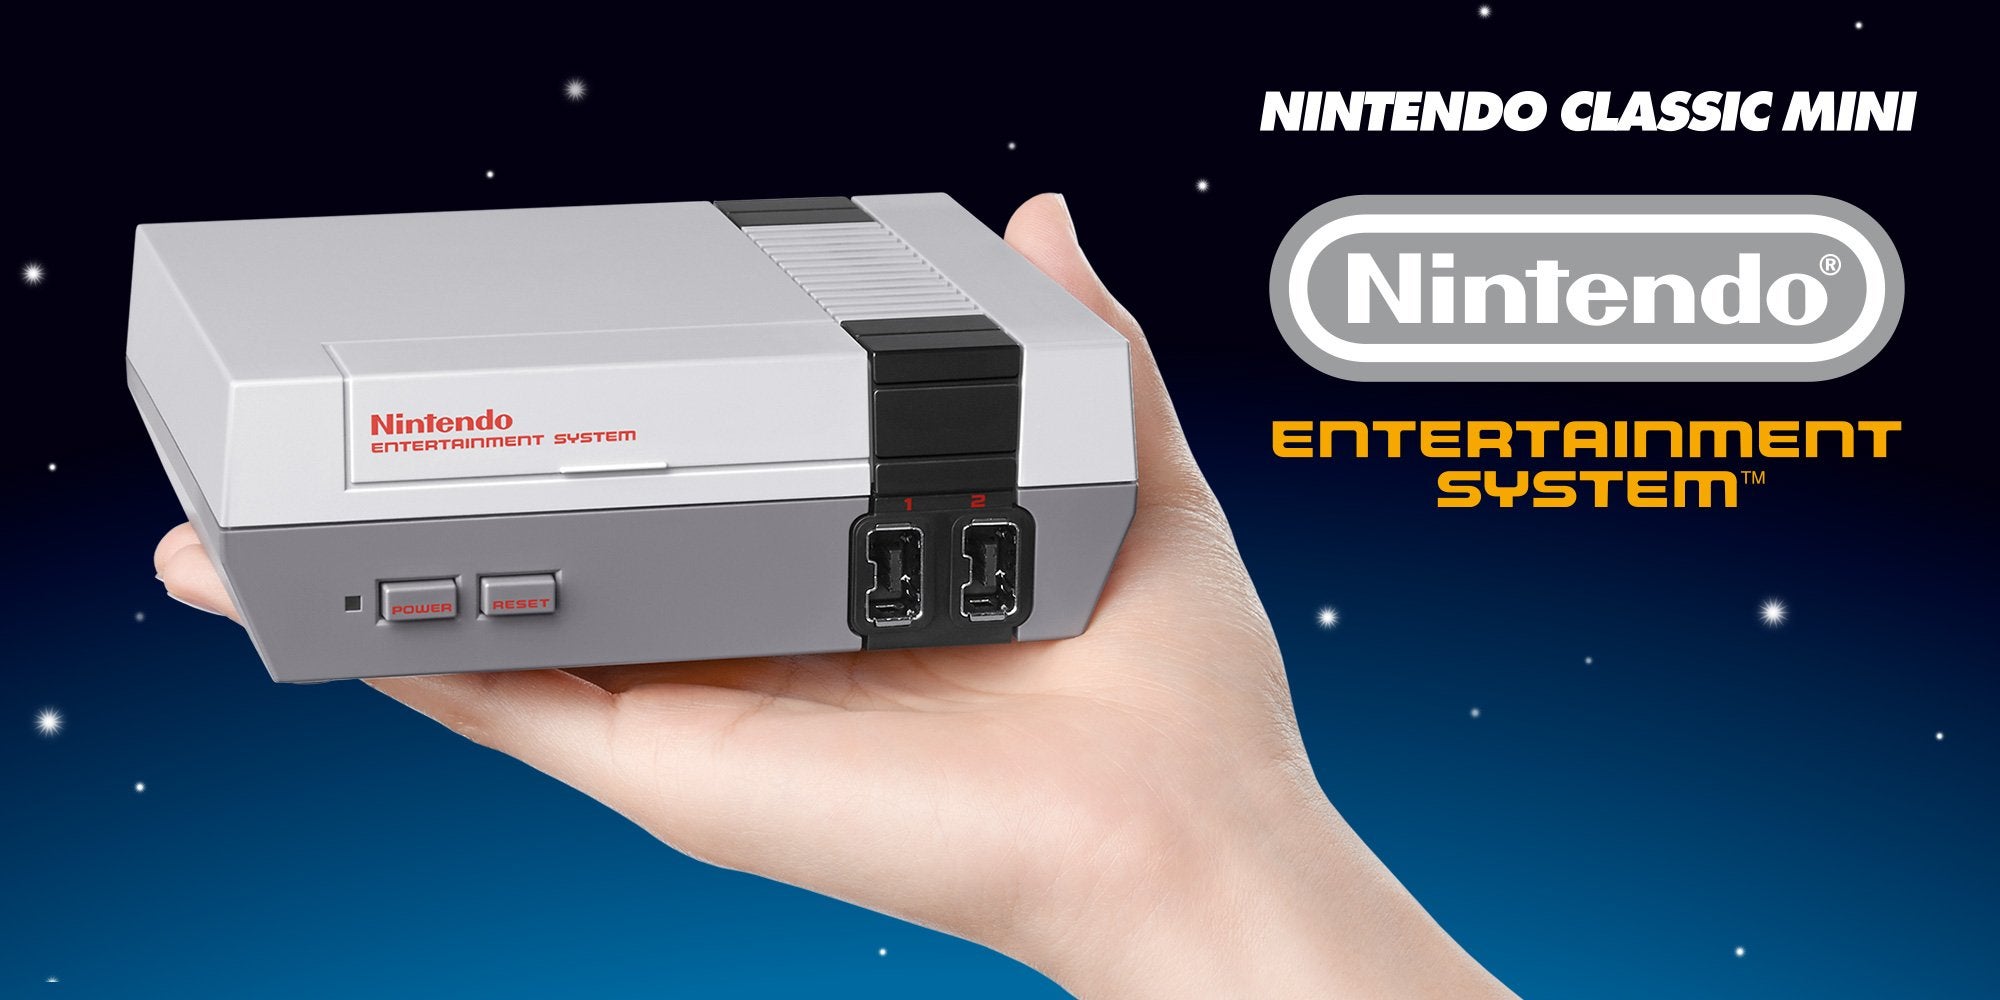 Image for Looking for the mini Nintendo Entertainment System? Best Buy's got you covered